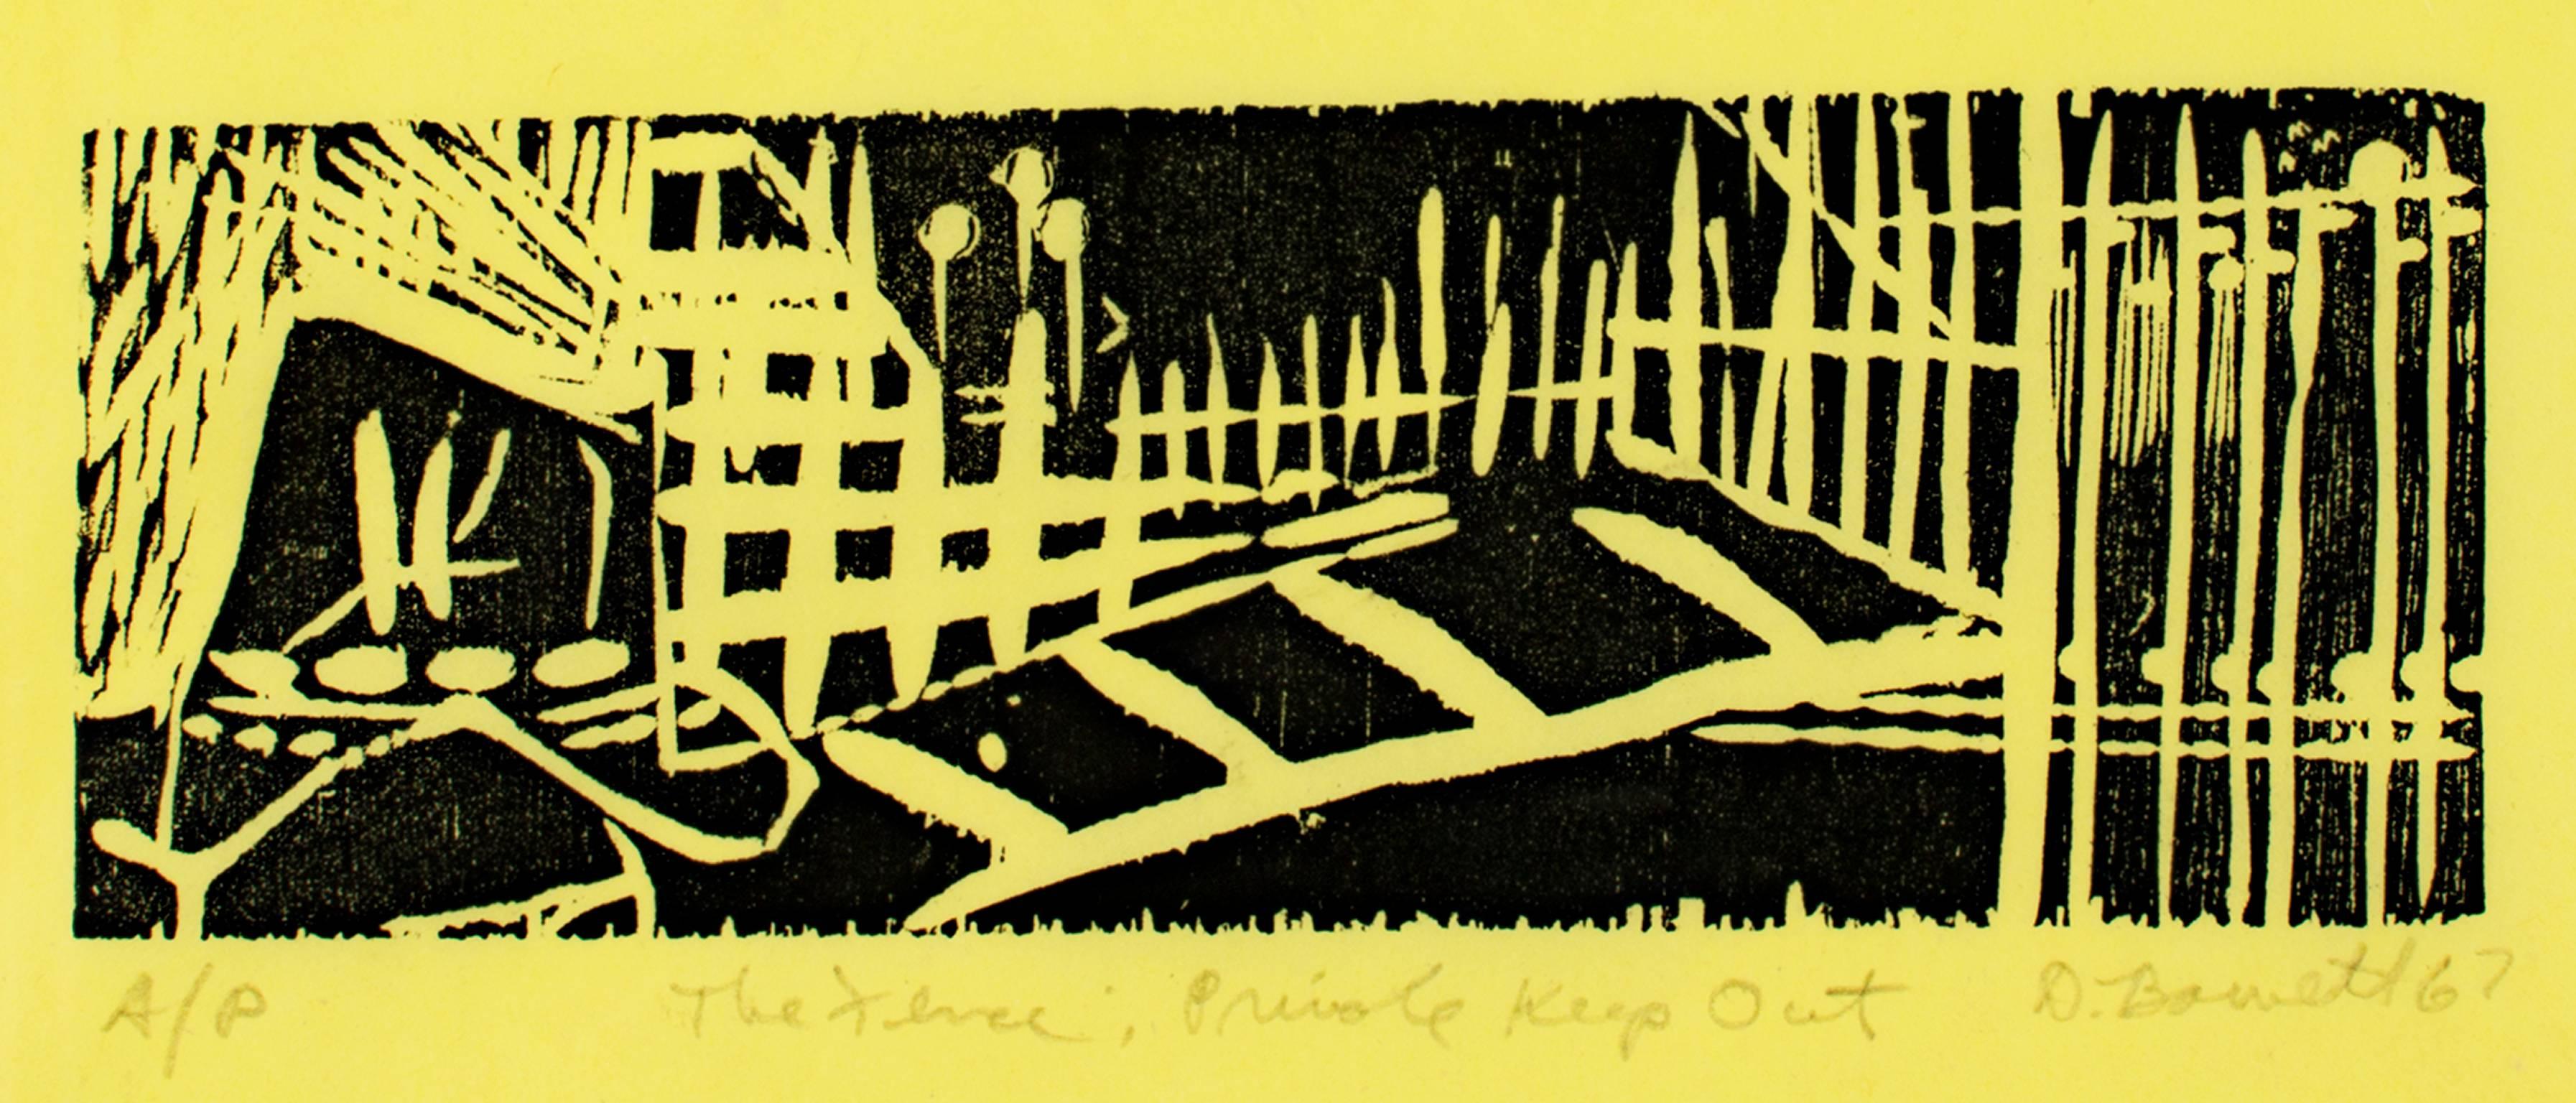 "The Fence, Private Keep Out" is an original linocut print on yellow paper by David Barnett. The artist signed the piece lower right, wrote the title lower center, and wrote the edition number (AP) lower left. This piece depicts a fence surrounding